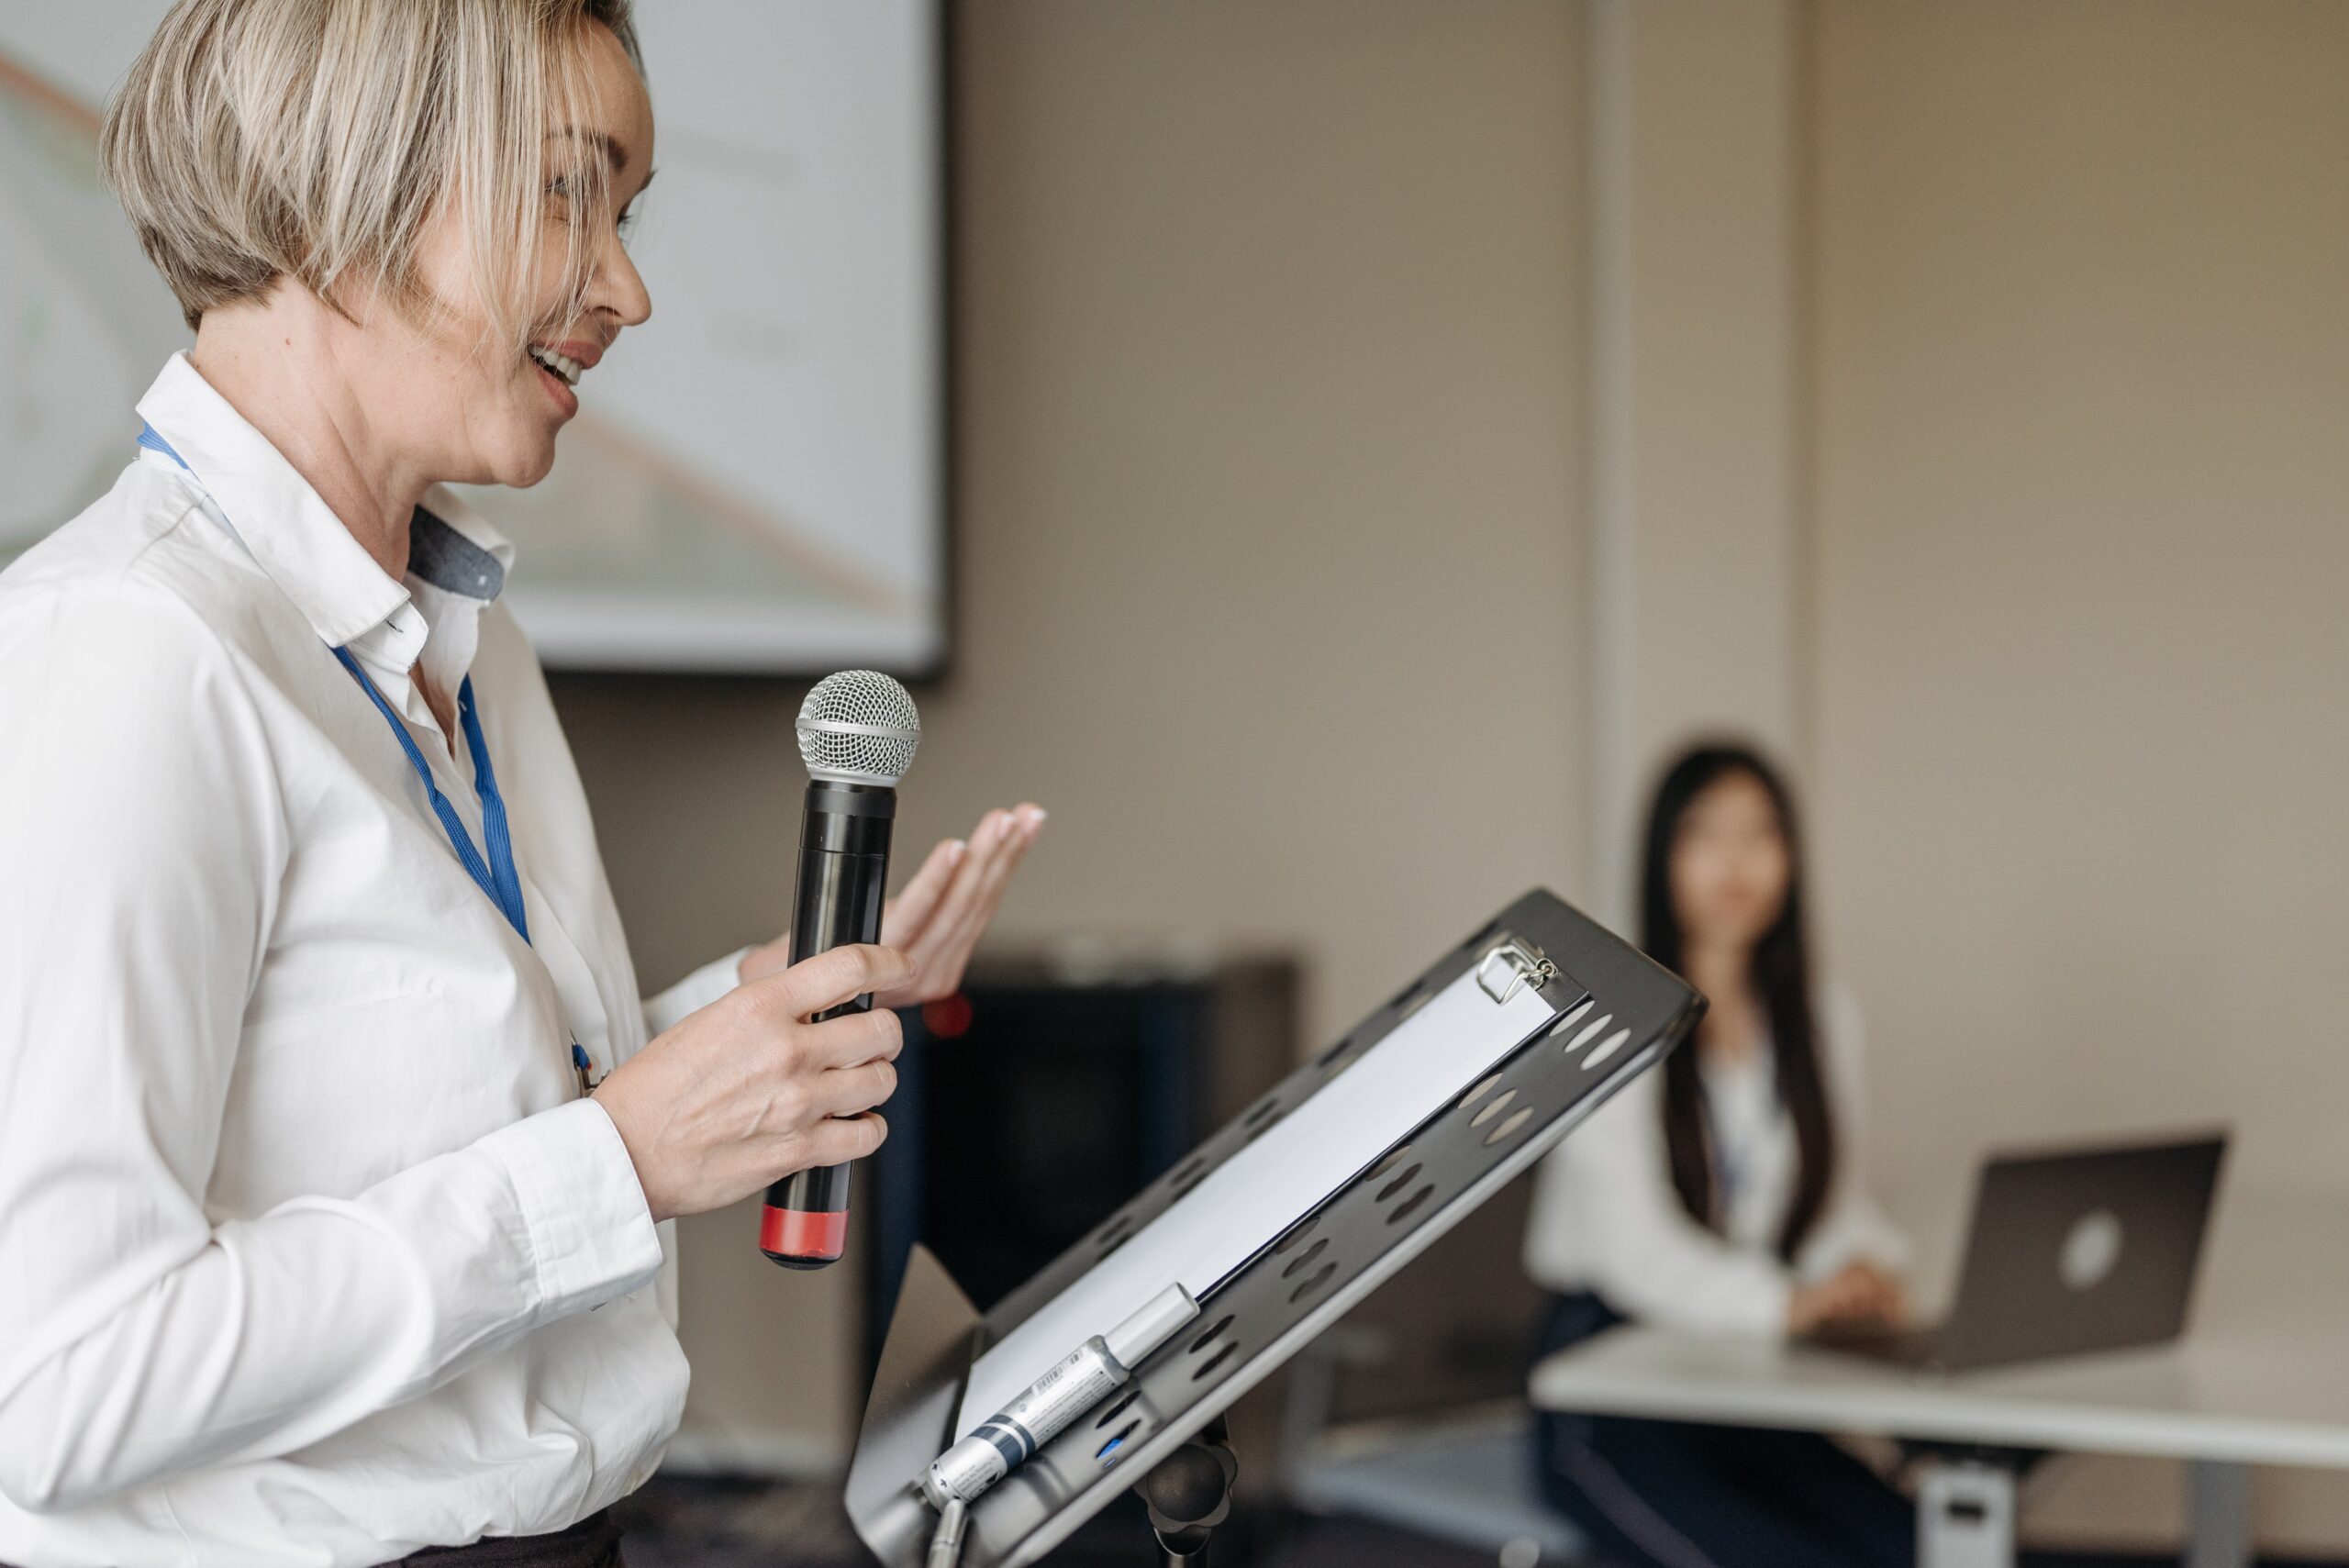 blond woman giving a presentation